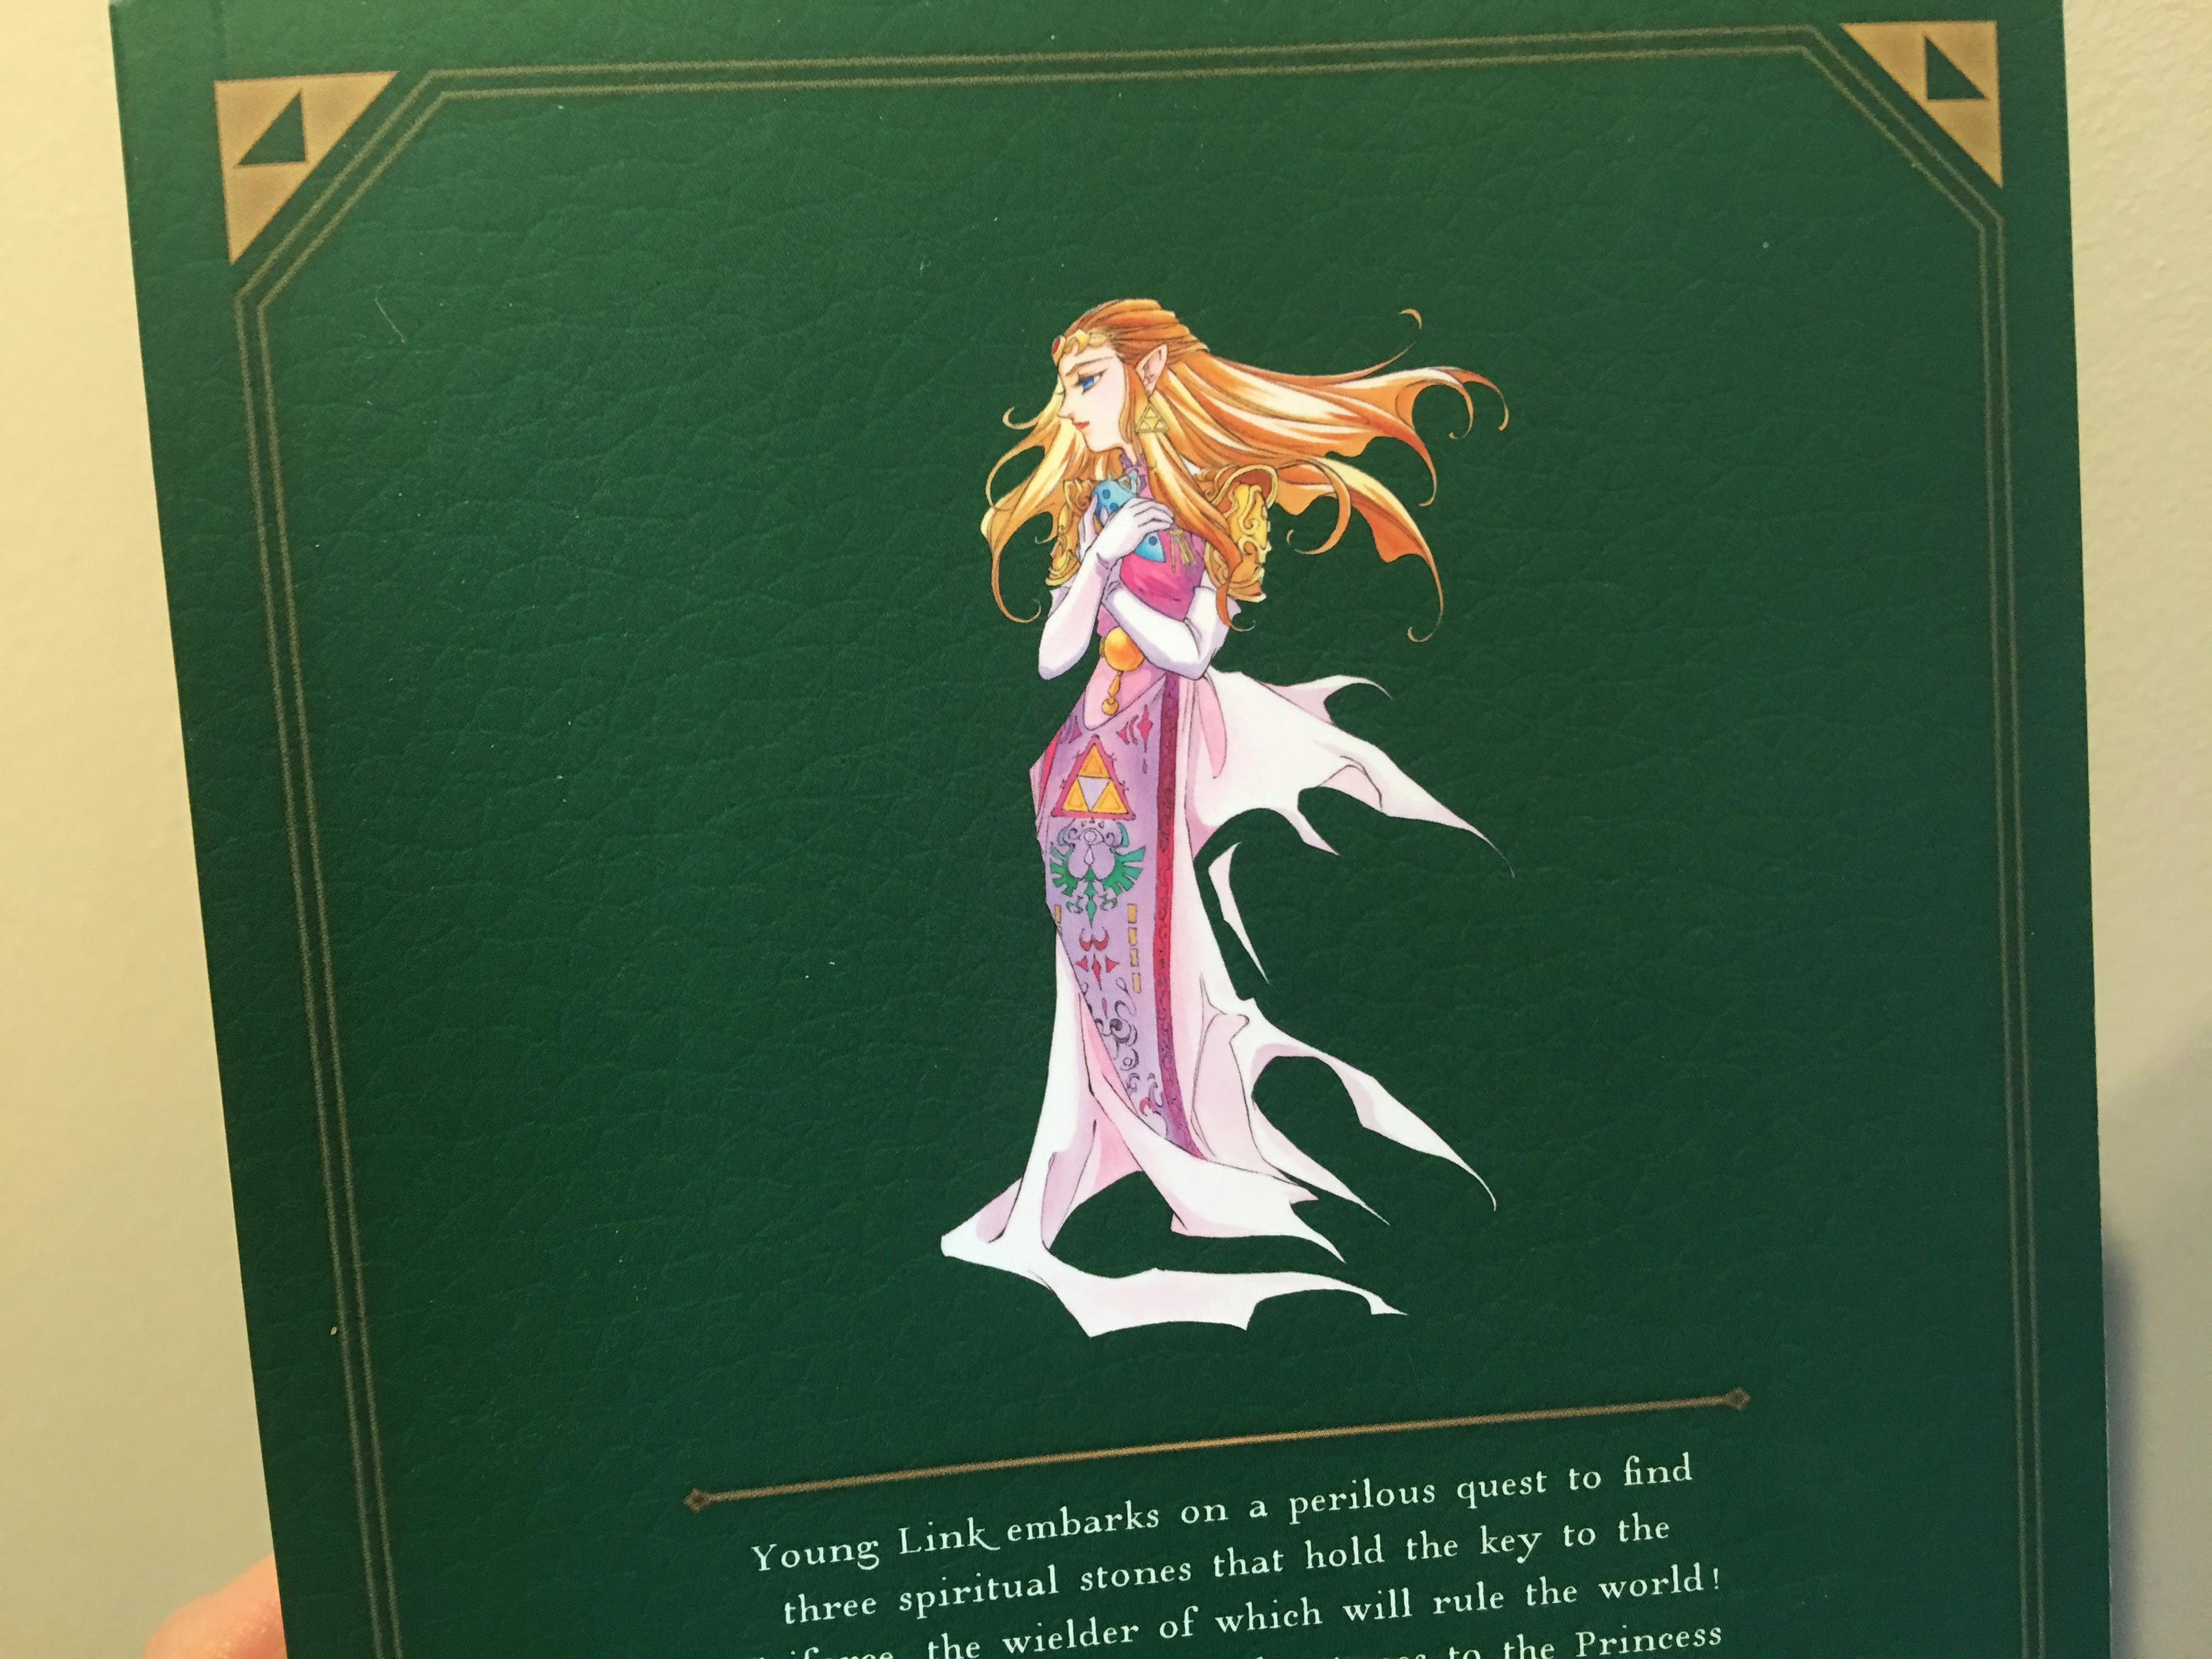 This lovely image of Zelda graces the back cover.